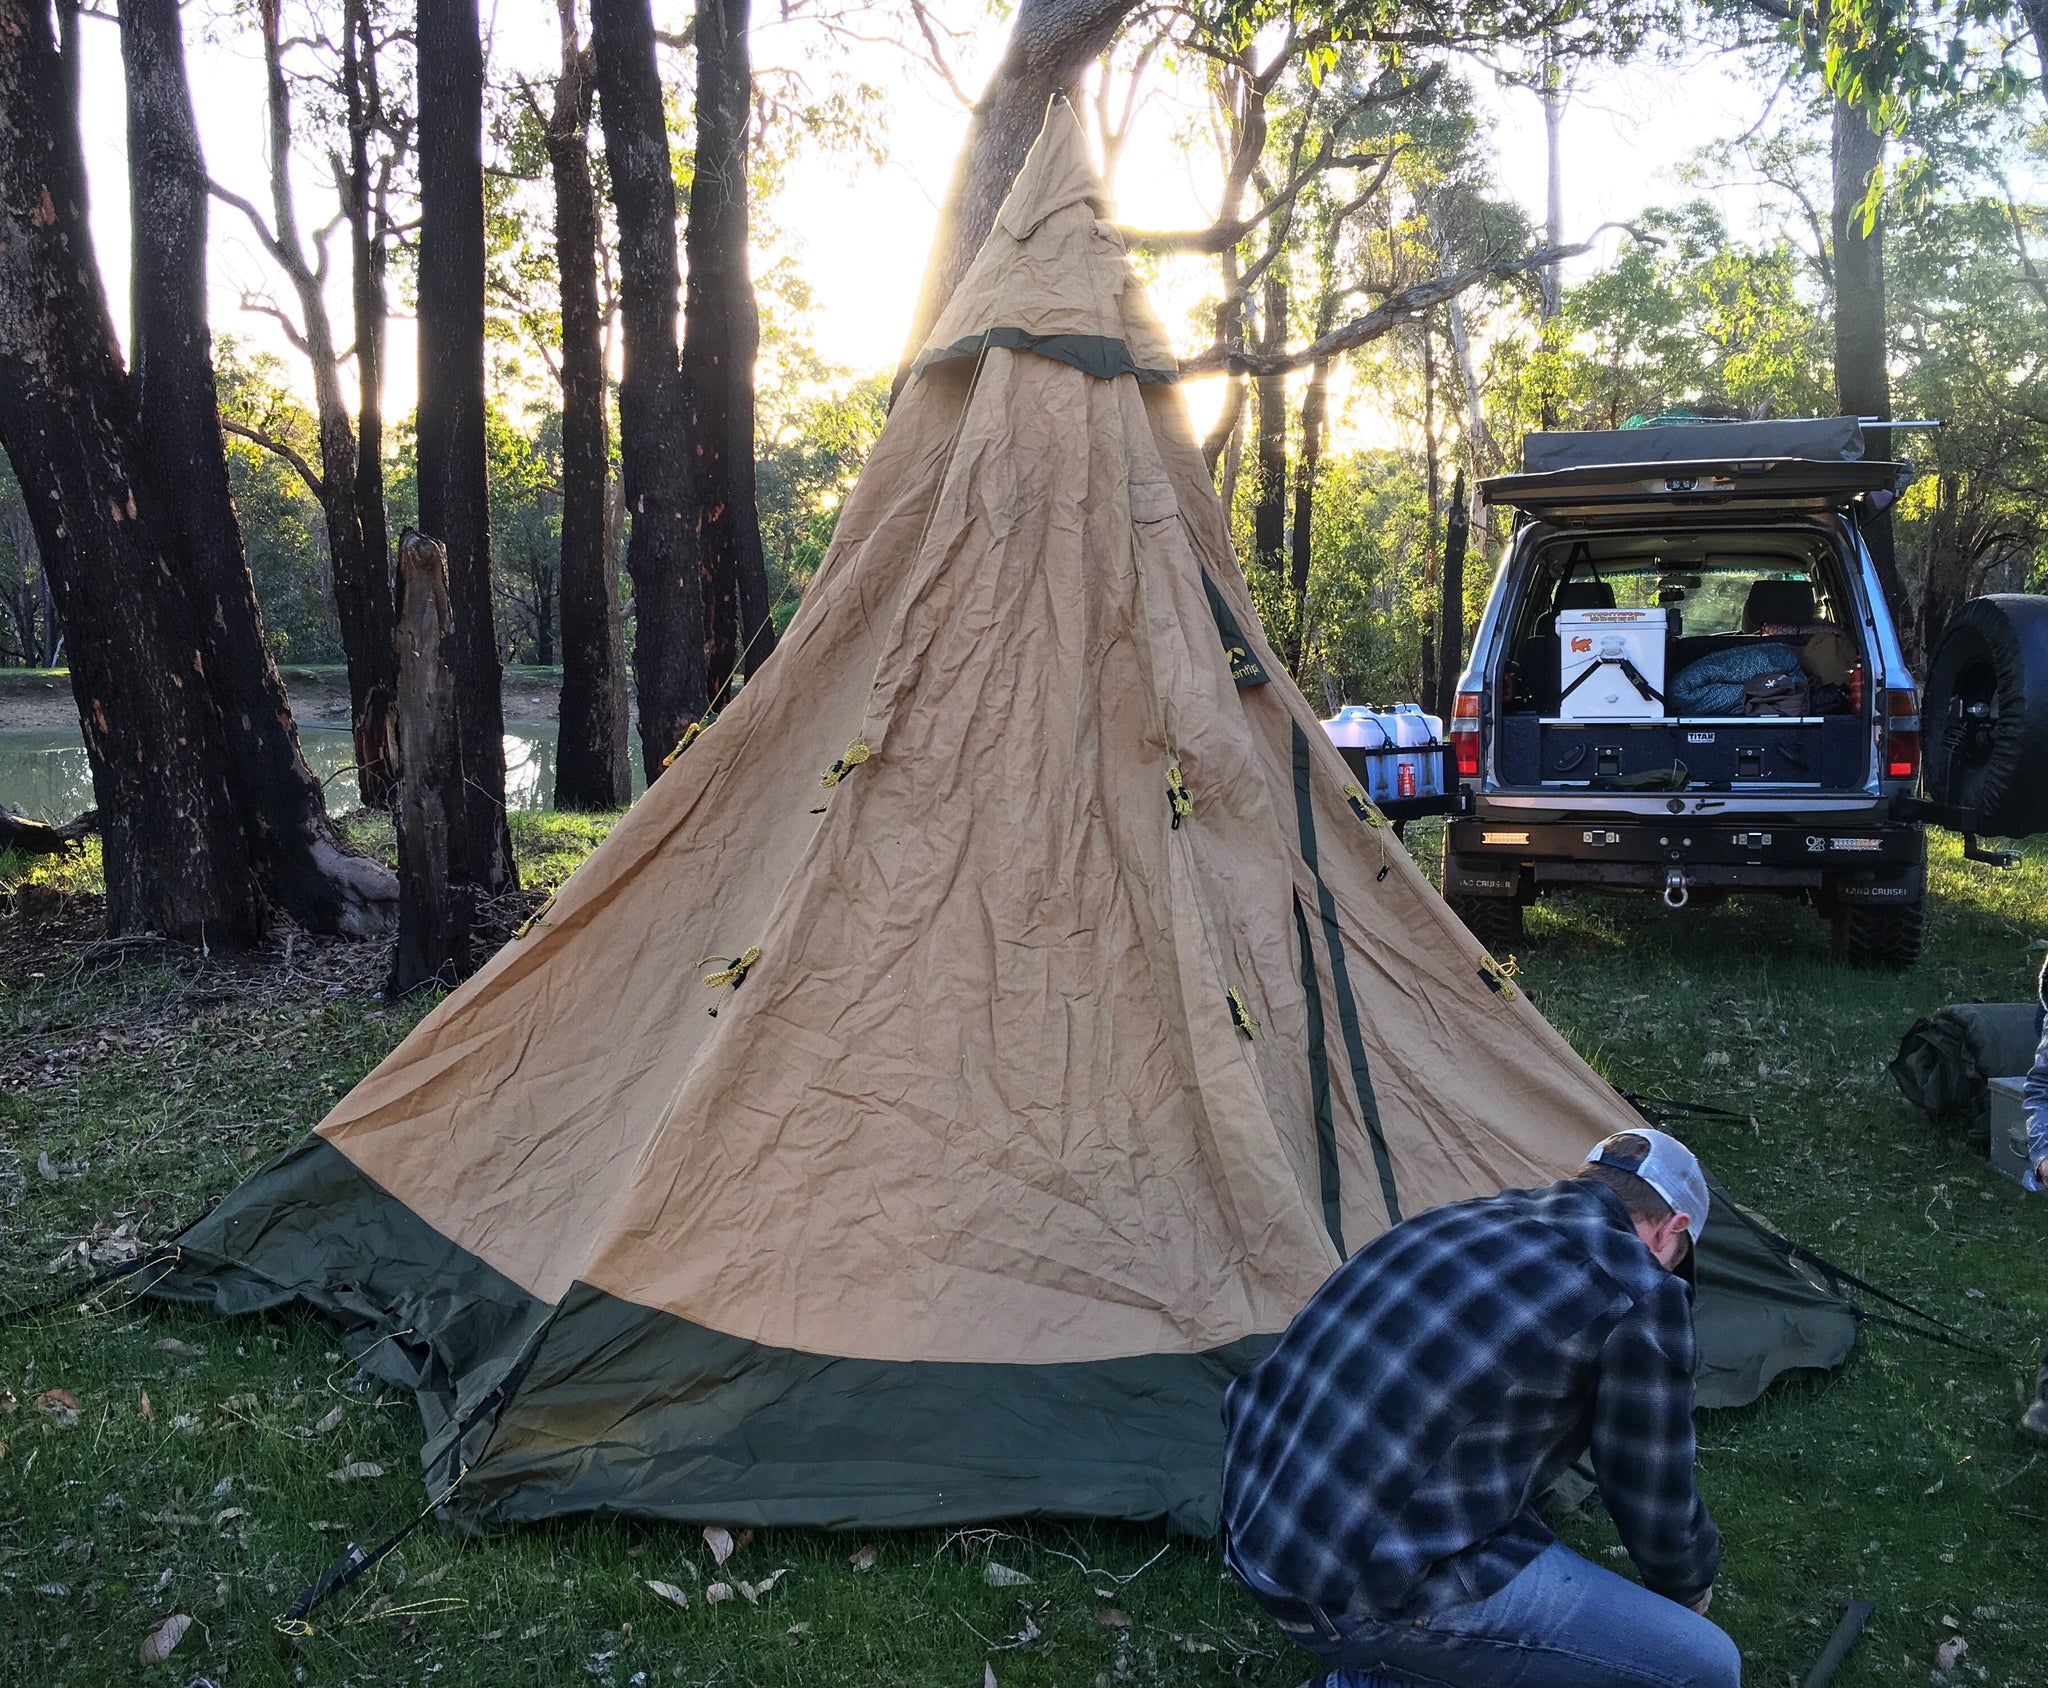 Tentipi of Sweden manufacture tipis for outdoor enthusiasts around the world. Very high quality materials and fabrics are used to form in our mind the best tents in the world. We used ours on a 6 month trip around Australia and loved it's breathability and easy pitch. Weighing in at 12kg it's not at all heavy and the size of 2 blocks of beer packed away if fits in most nooks in the wagon. We put ours on the floor behind the drivers seat so it was easy to get to. We will be using it for a upcoming trip to the Kimberley in Western Australia. We have used this tent on the Tele Track, Bloomfield Track, Outback Queensland, Fraser Island to name a few.